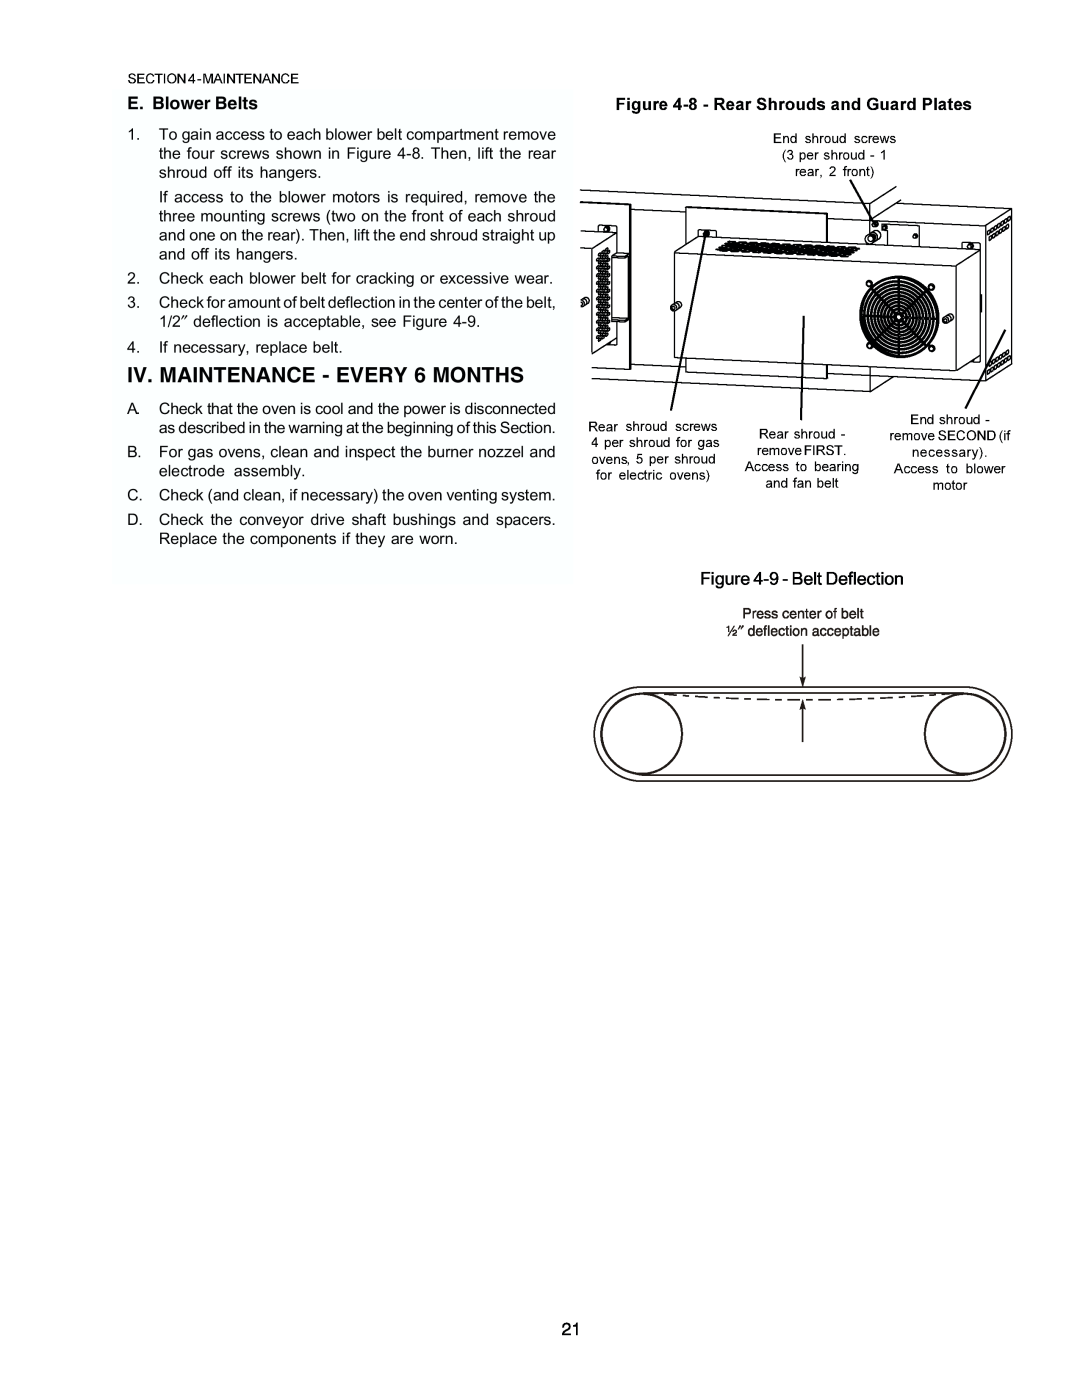 Middleby Cooking Systems Group PS870 Series manual IV. MAINTENANCE - EVERY 6 MONTHS, E. Blower Belts 